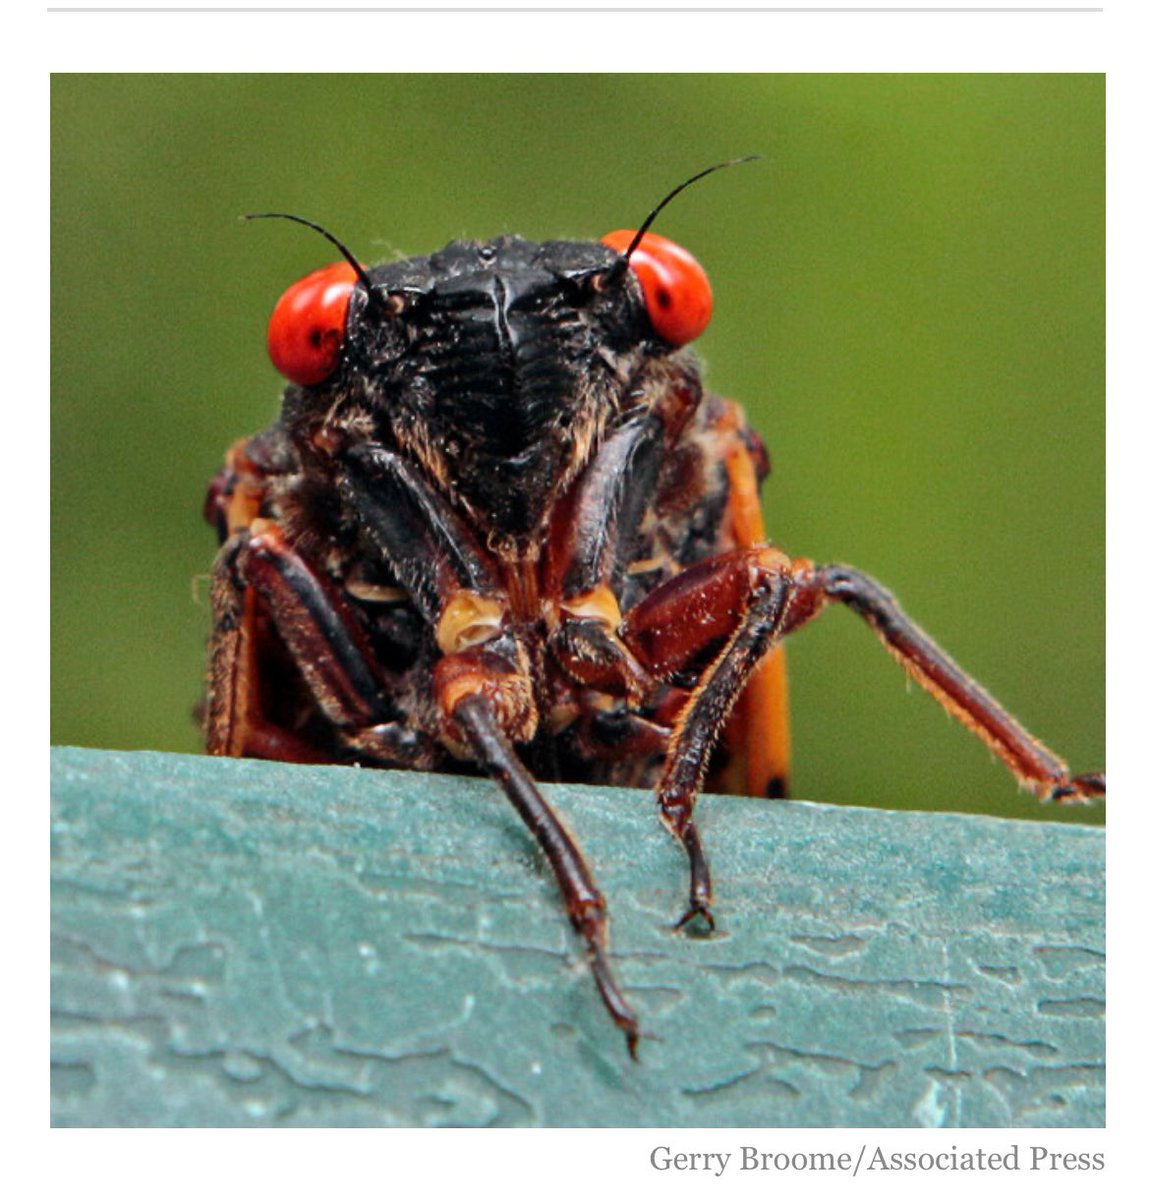 Up to a trillion cicadas are about to begin appearing in the Midwest and Southeast. Watch where you step 😬